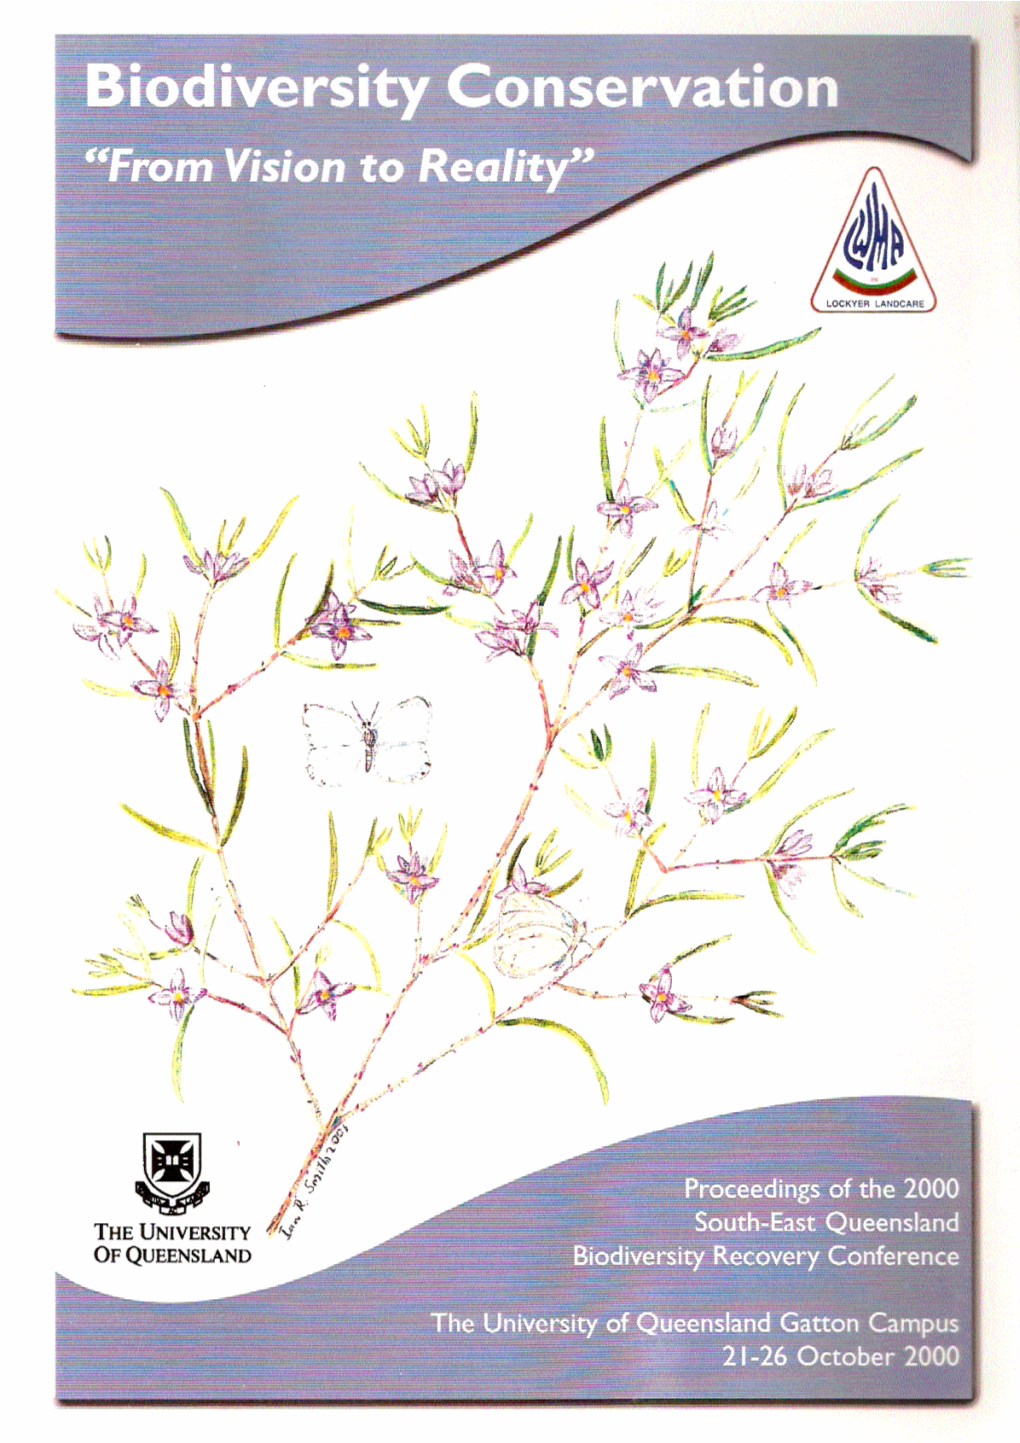 2000 South East Queensland Biodiversity Conference Proceedings